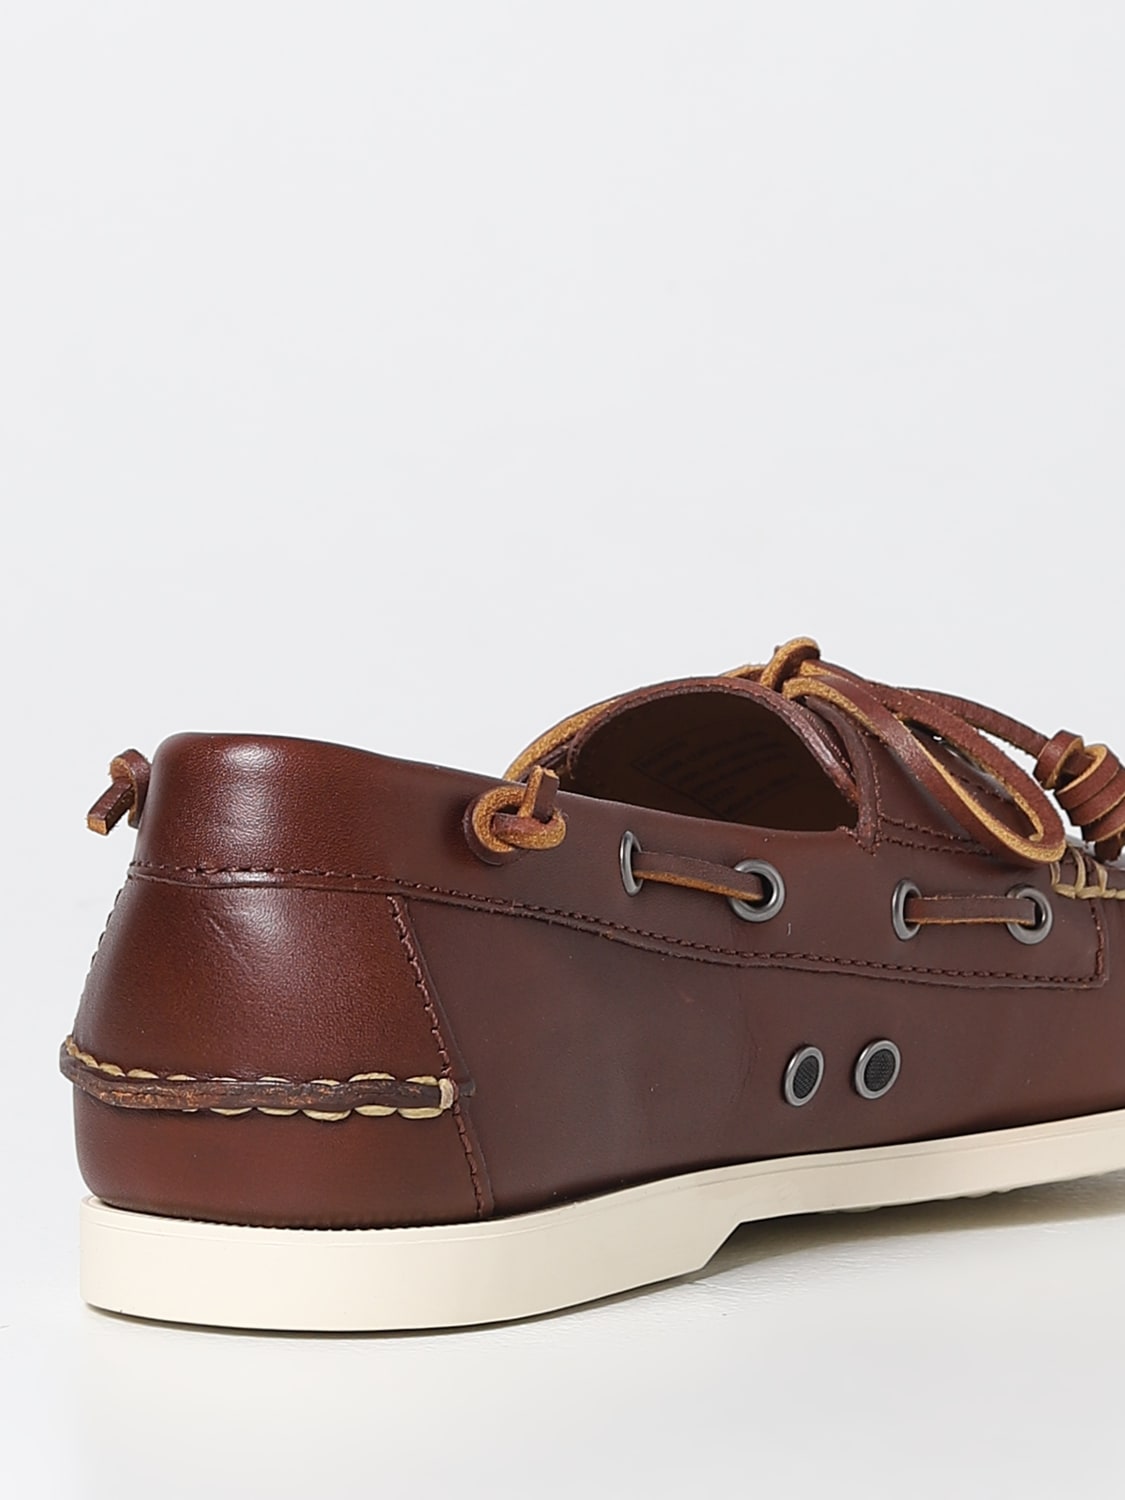 Gamle tider Pil sol POLO RALPH LAUREN: loafers for man - Leather | Polo Ralph Lauren loafers  803688543 online at GIGLIO.COM